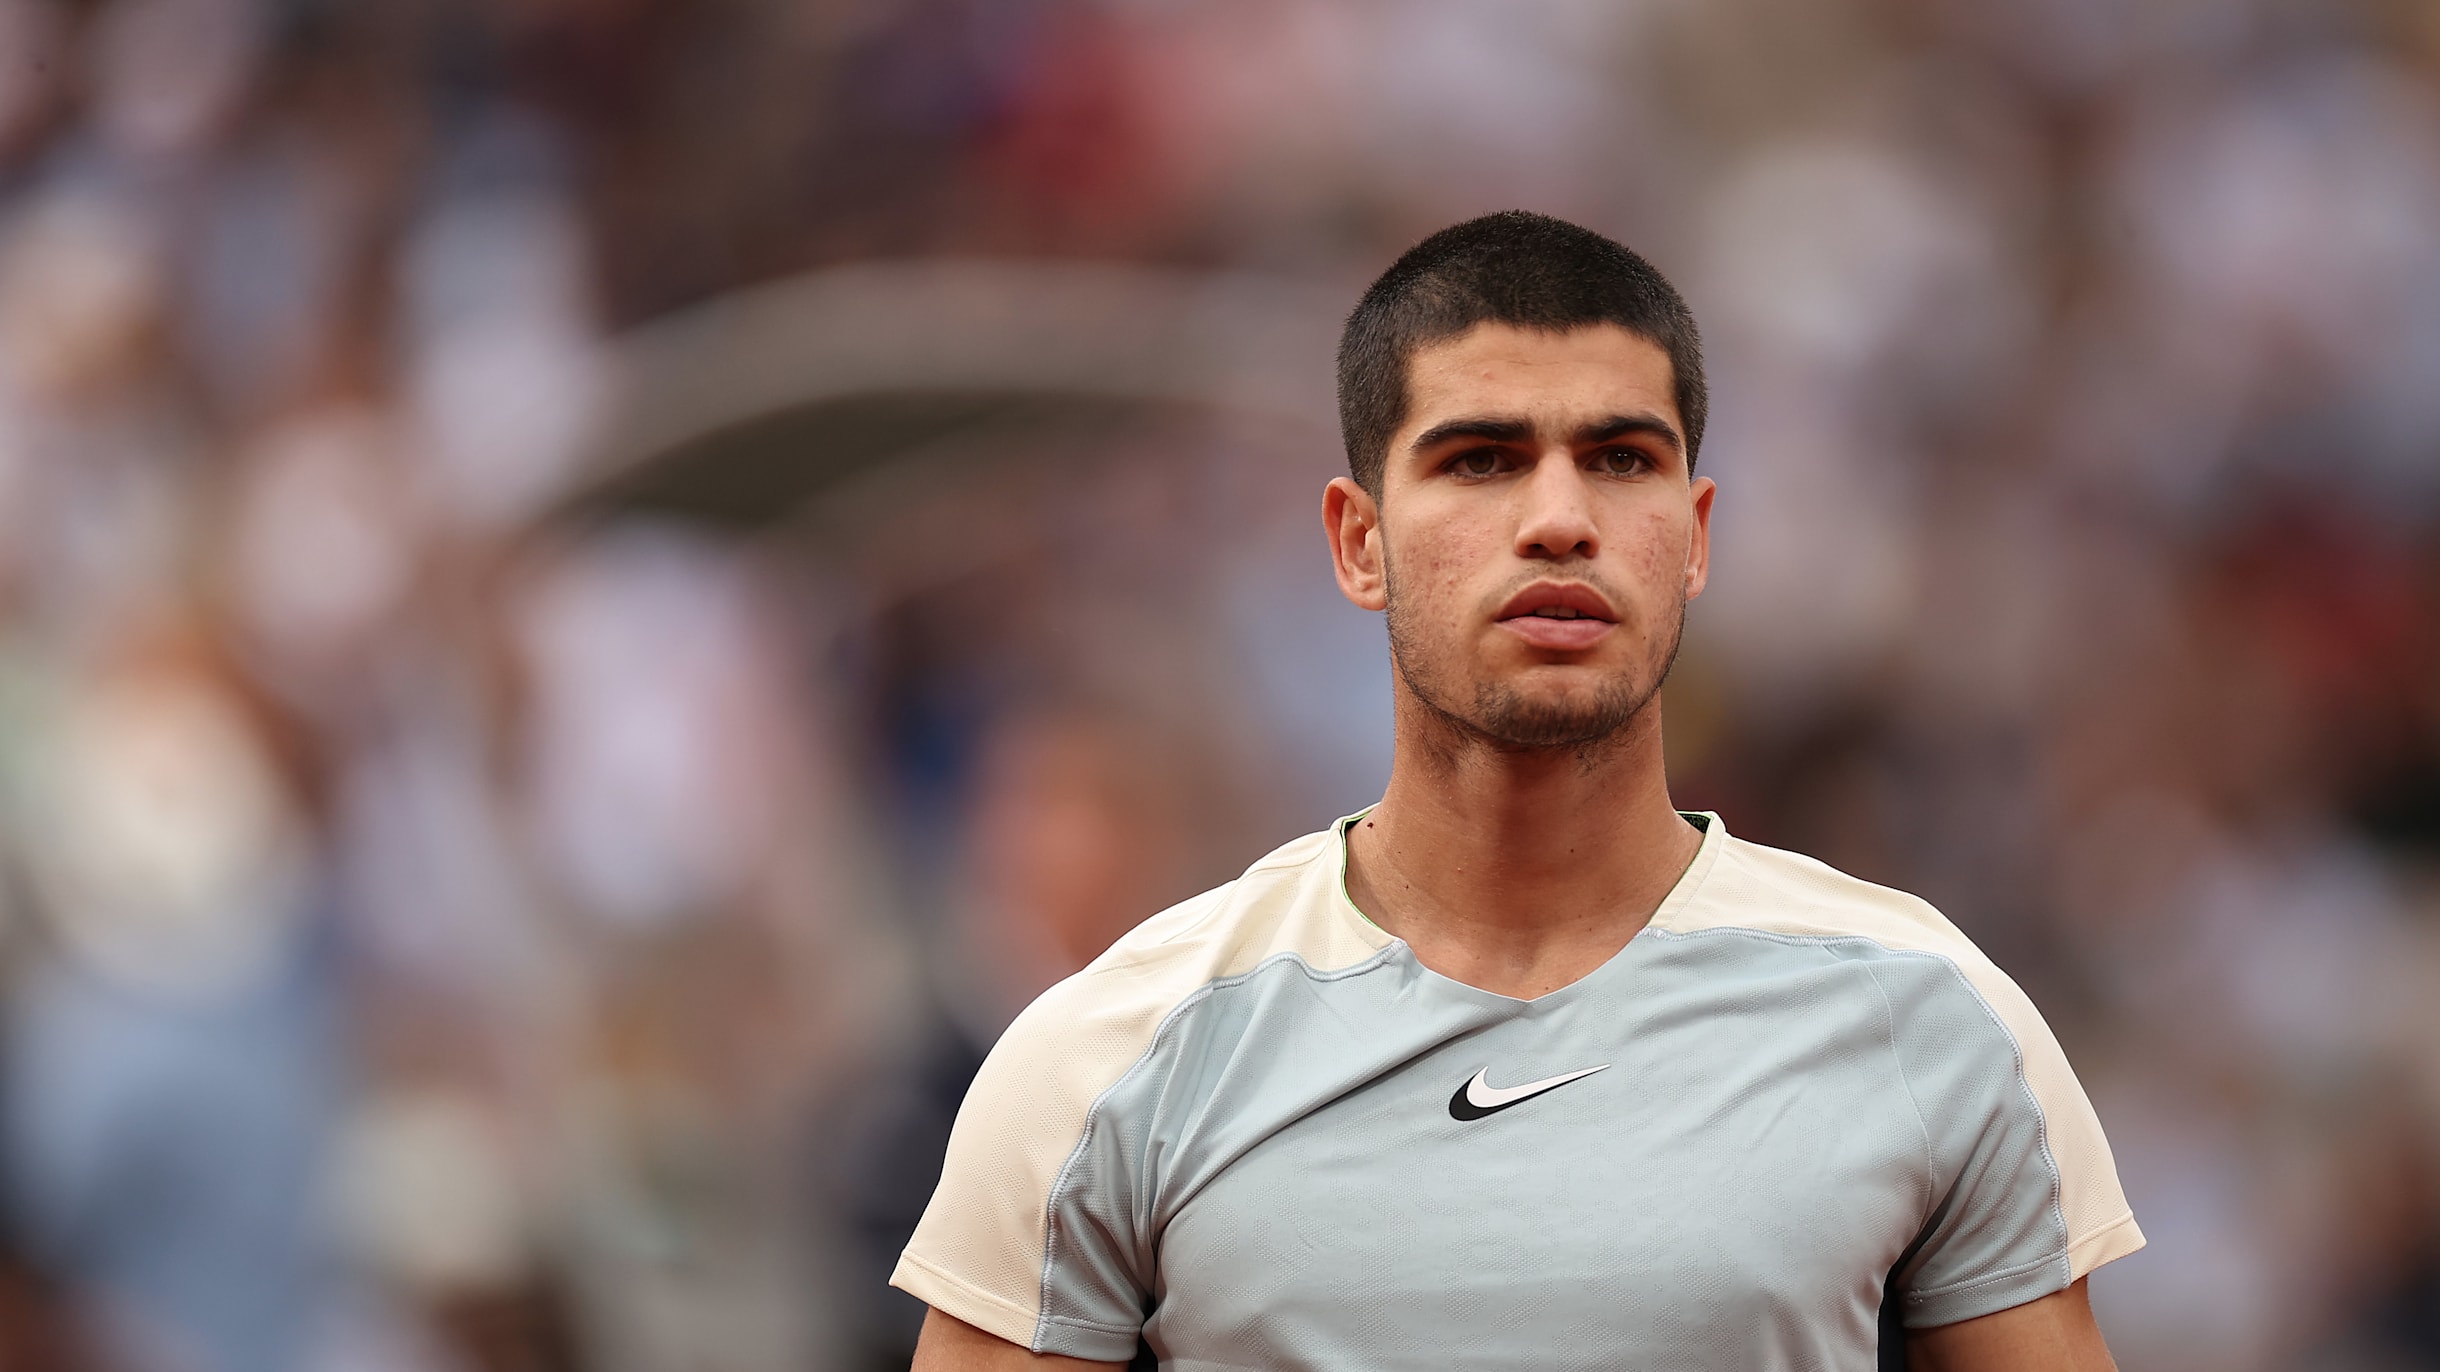 Who Is Carlos Alcaraz? 5 Facts About the Spanish Tennis Star